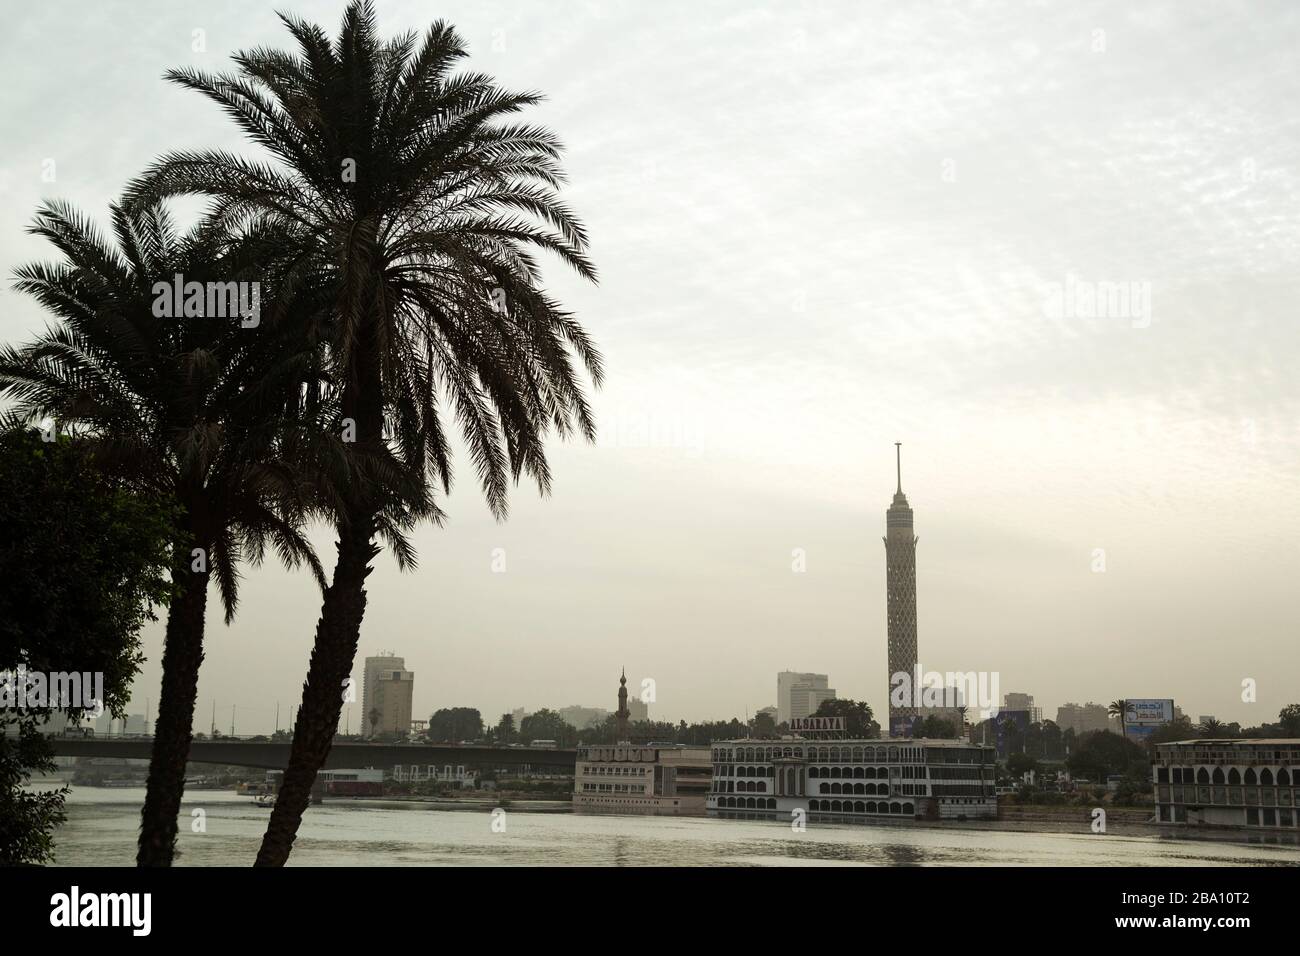 Palm trees by the River Nile in Cairo, Egypt. The Cairo Tower, known as Nasser's Pineapple, dominates the urban landscape. Stock Photo